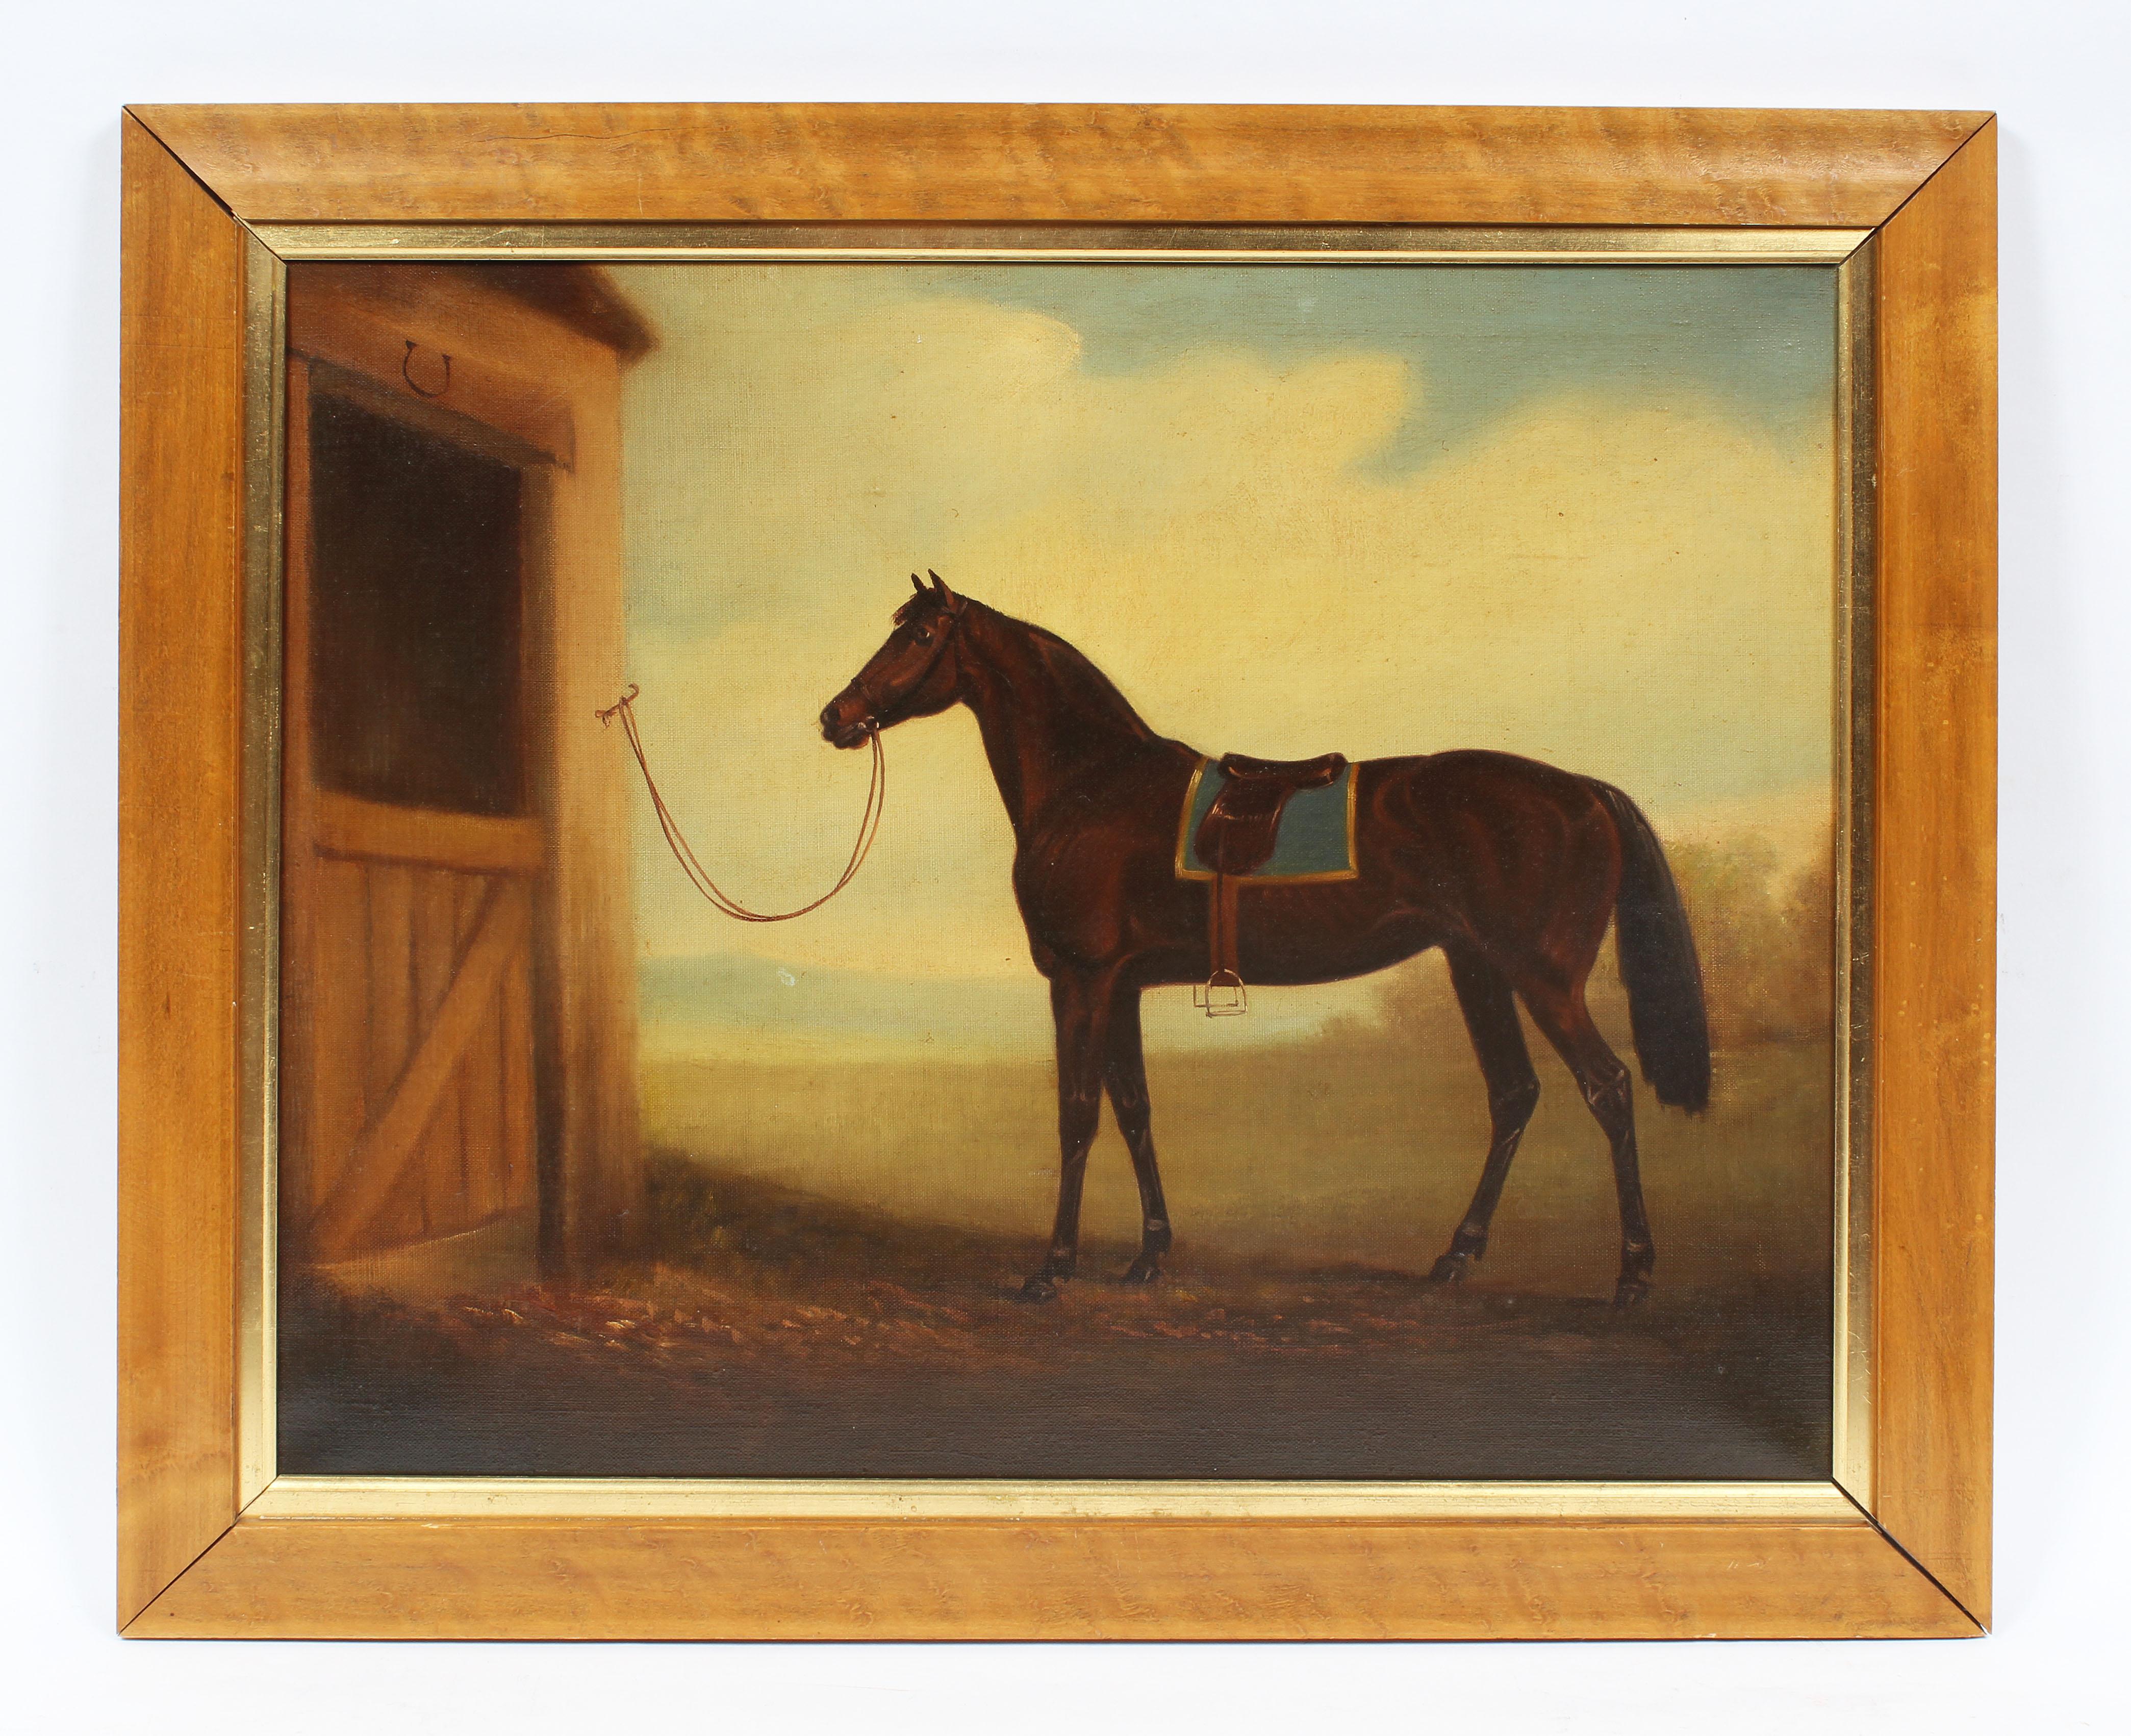 Antique American school horse portrait oil painting .  Oil on canvas, circa 1880. Signed on verso illegibly.  Displayed in a wood frame.  Image, 22